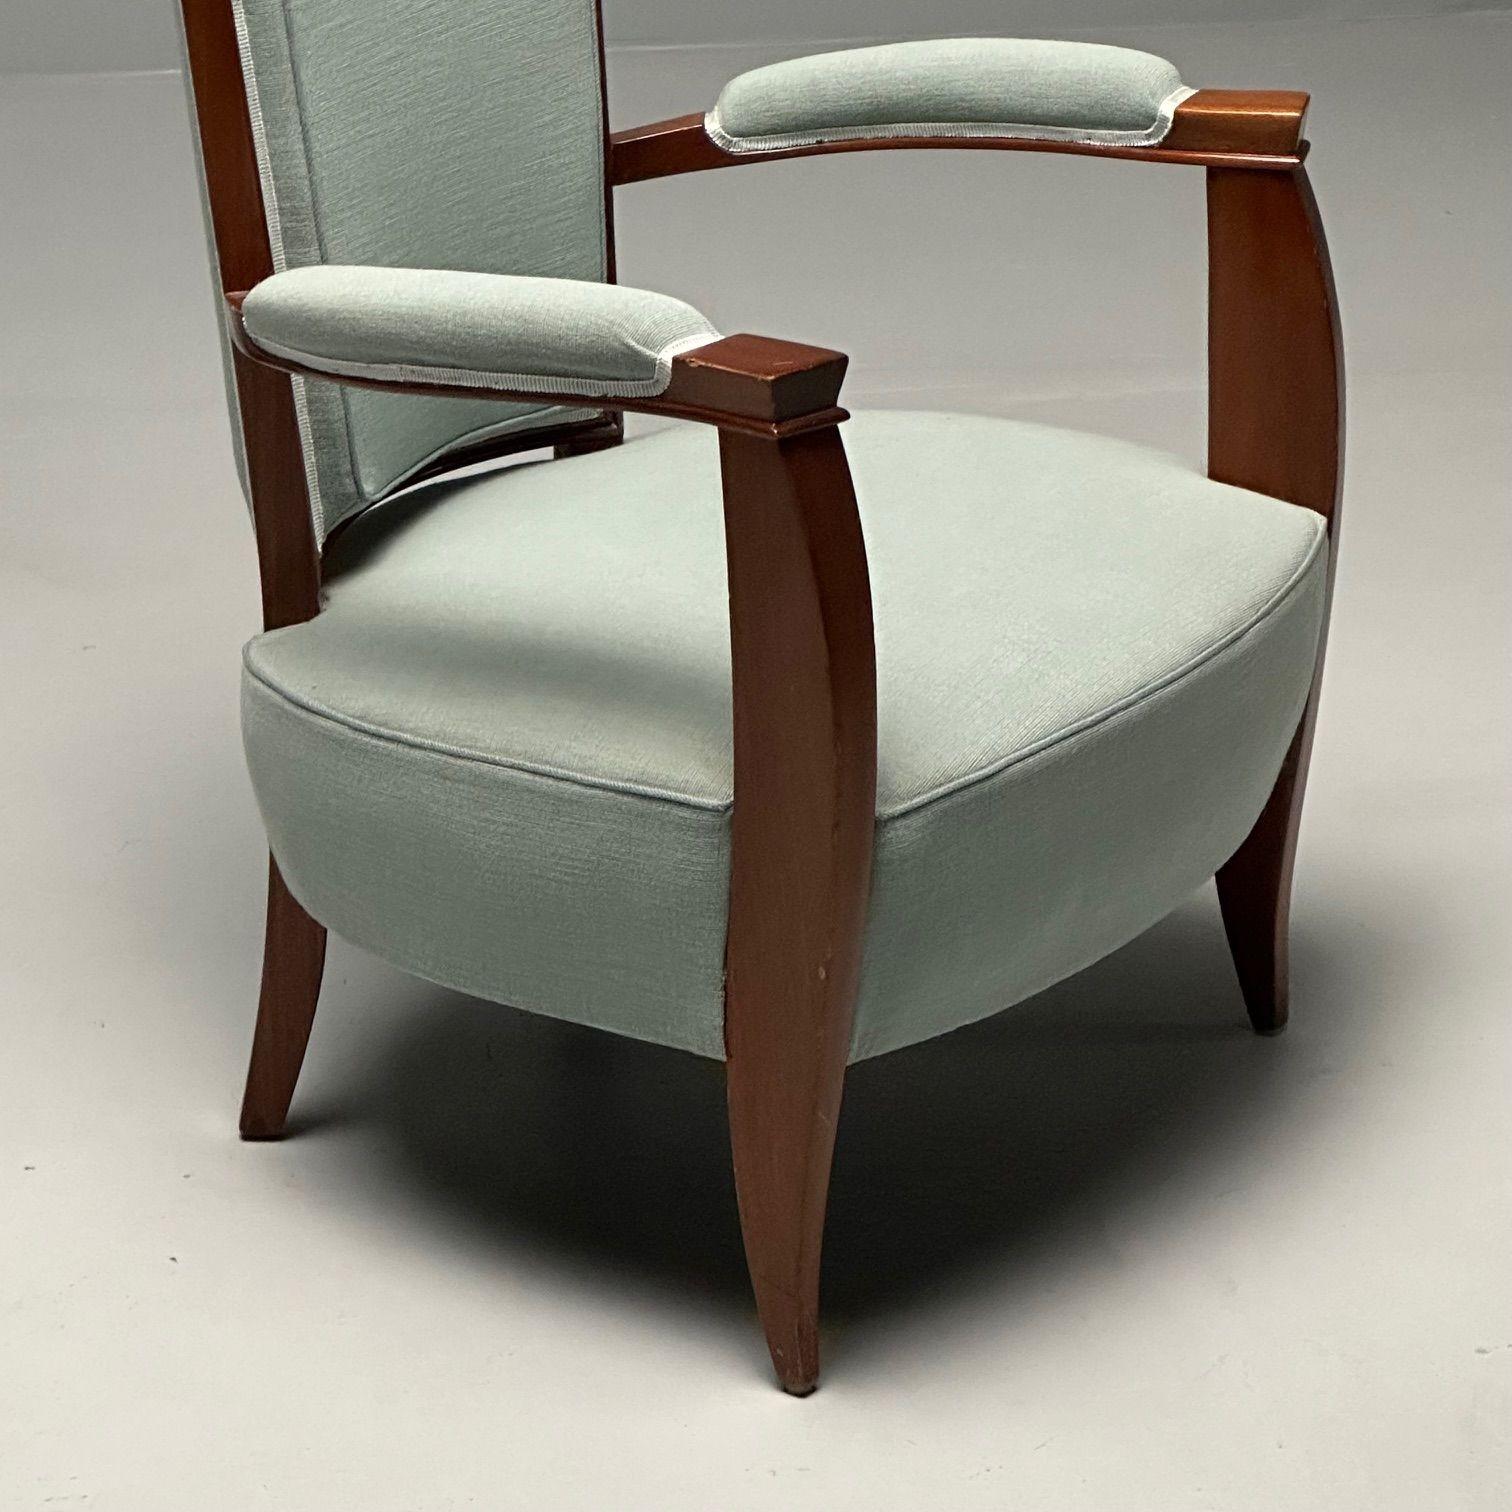 French Art Deco, High-Back Chairs, Mahogany, Turqoise Linen, France, 1970s For Sale 5